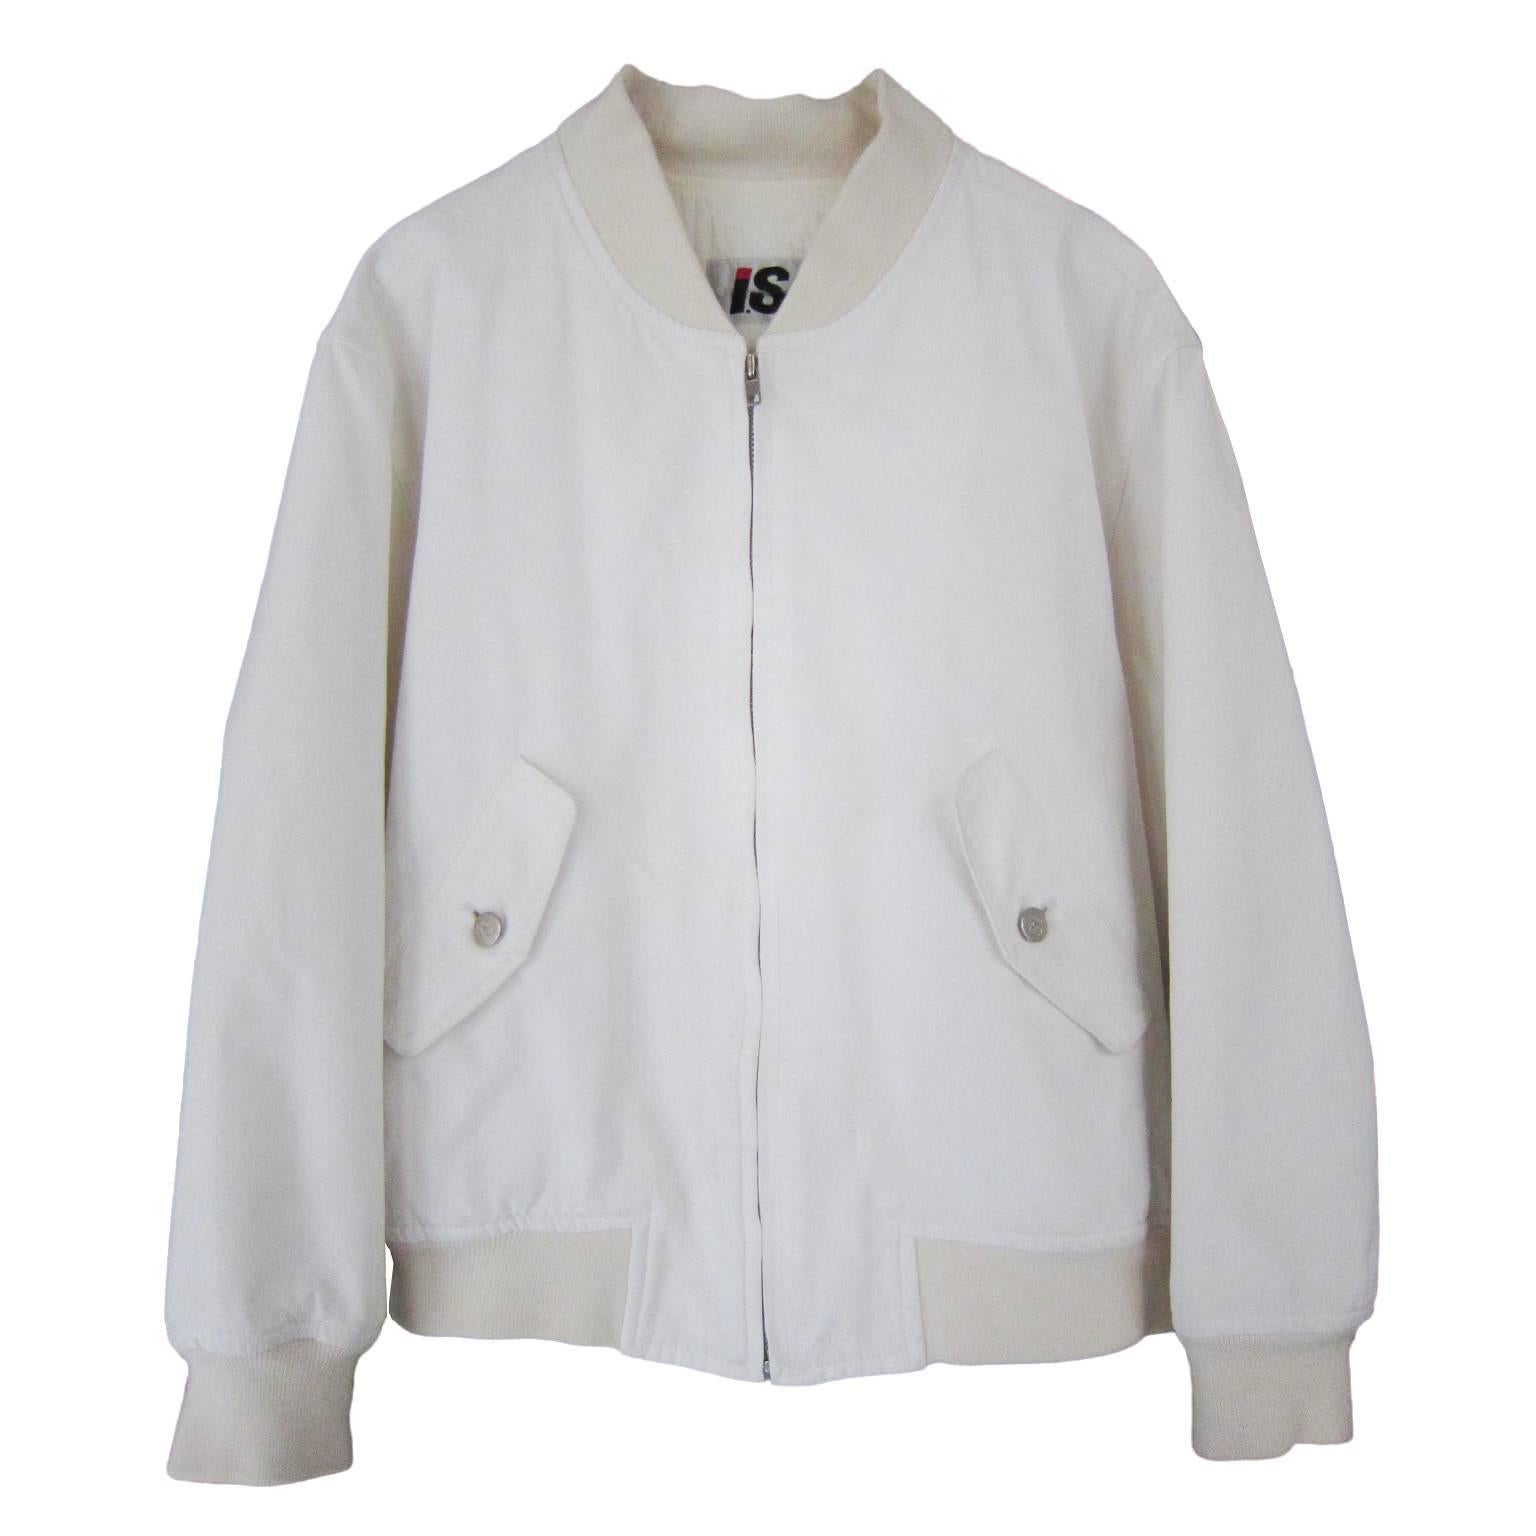 Issey Miyake sport line I.S. white bomber jacket from 80s.
Fully lined. 
Measurements: 
Length : 58 cm
Underarm : 60 cm
shoulder : 50 cm
Sleeve : 55 cm